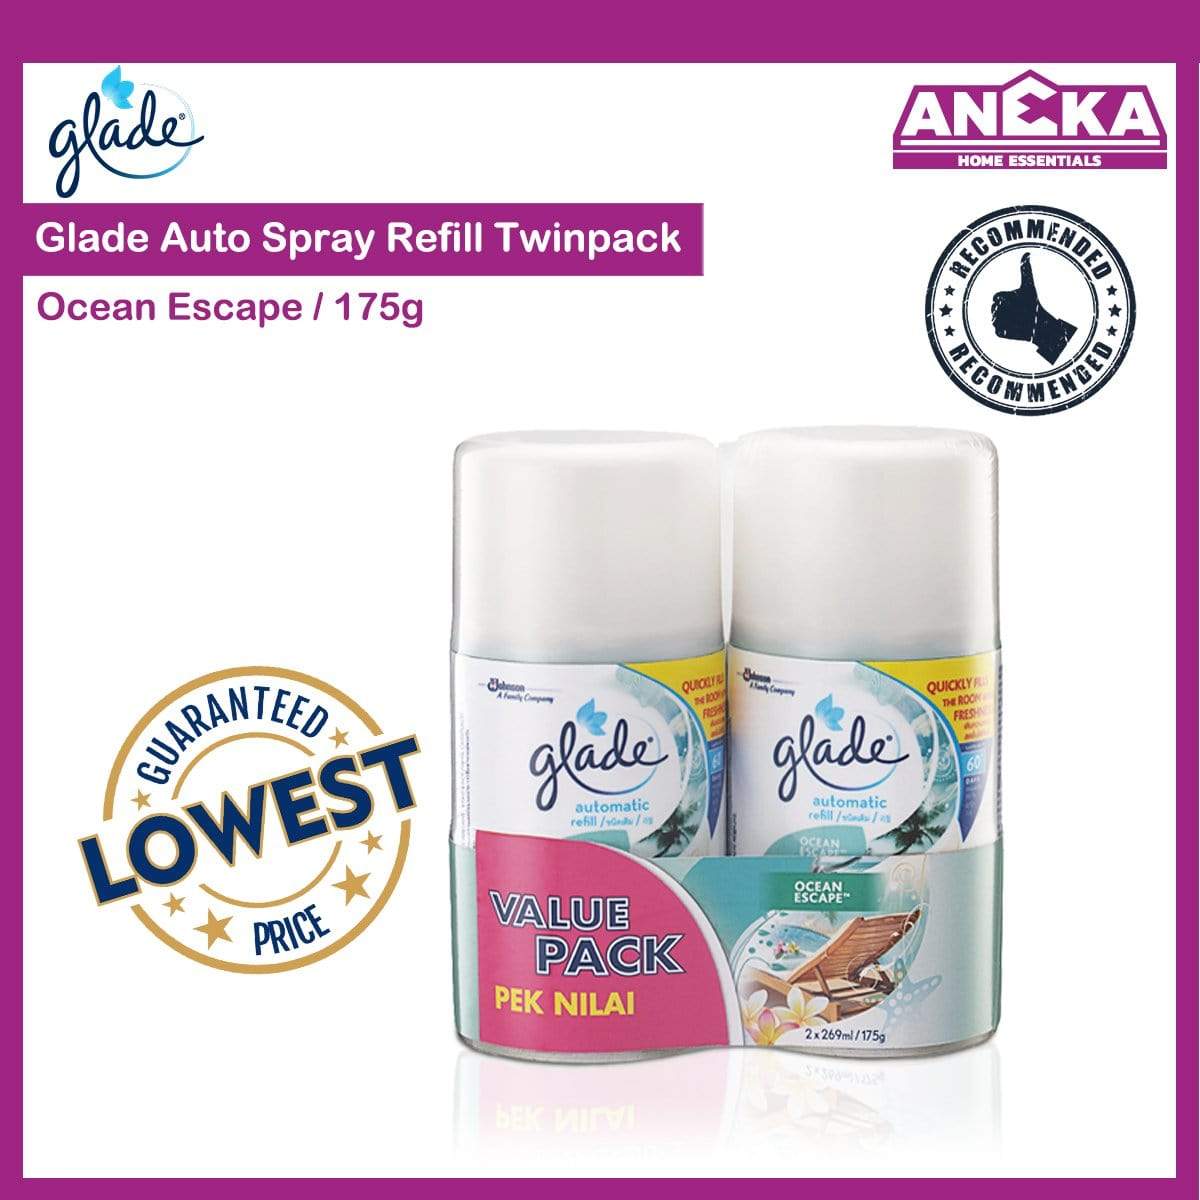 Glade Automatic Spray Twin Pack Ocean Escape Refill 175g - ANEKA